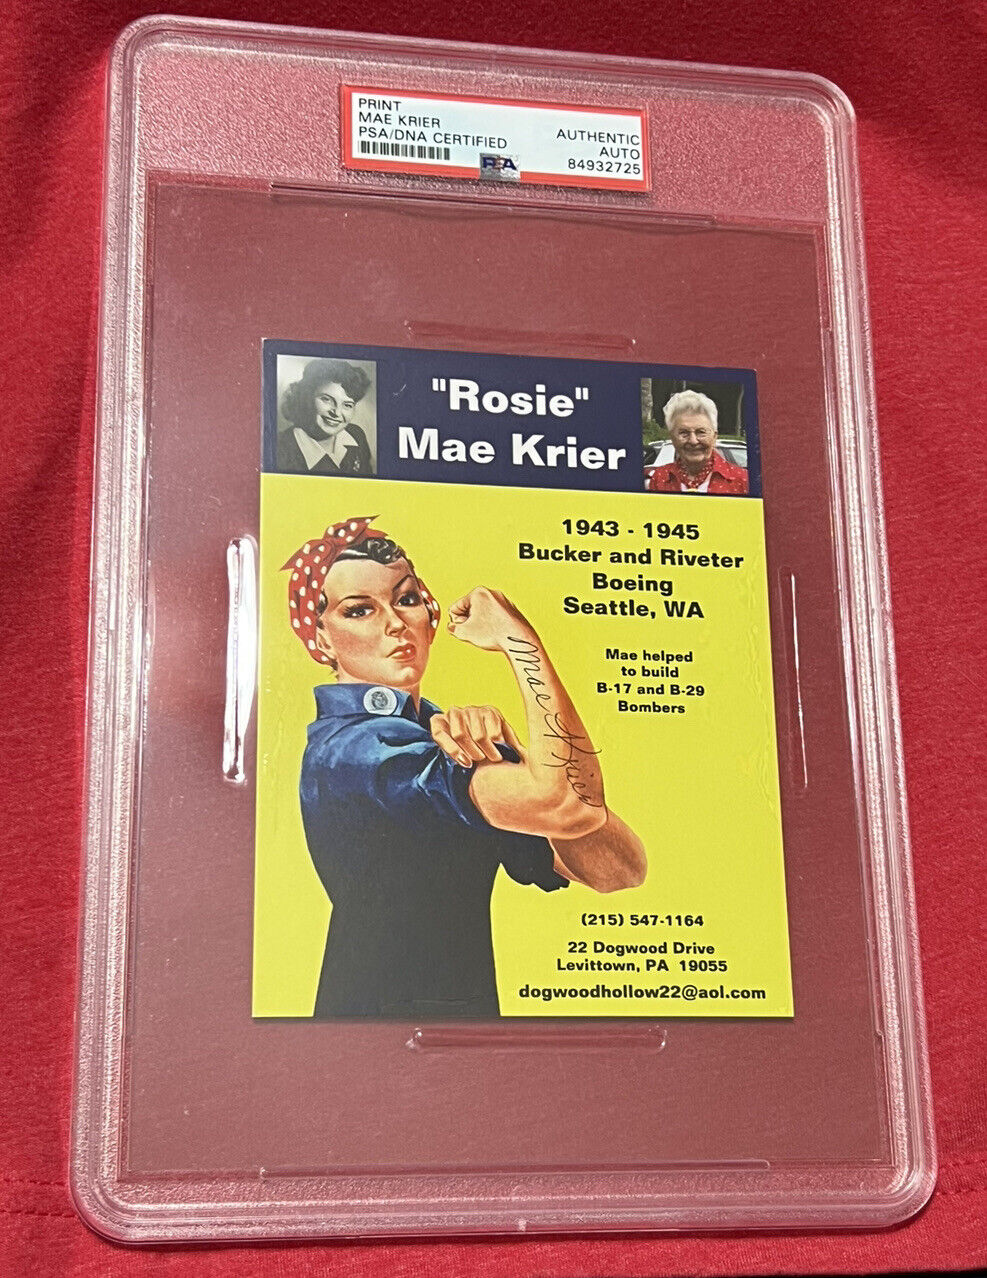 Rosie Mae Krier Rosie the Riveter  PSA/DNA Authenticated Autograph Signed Photo